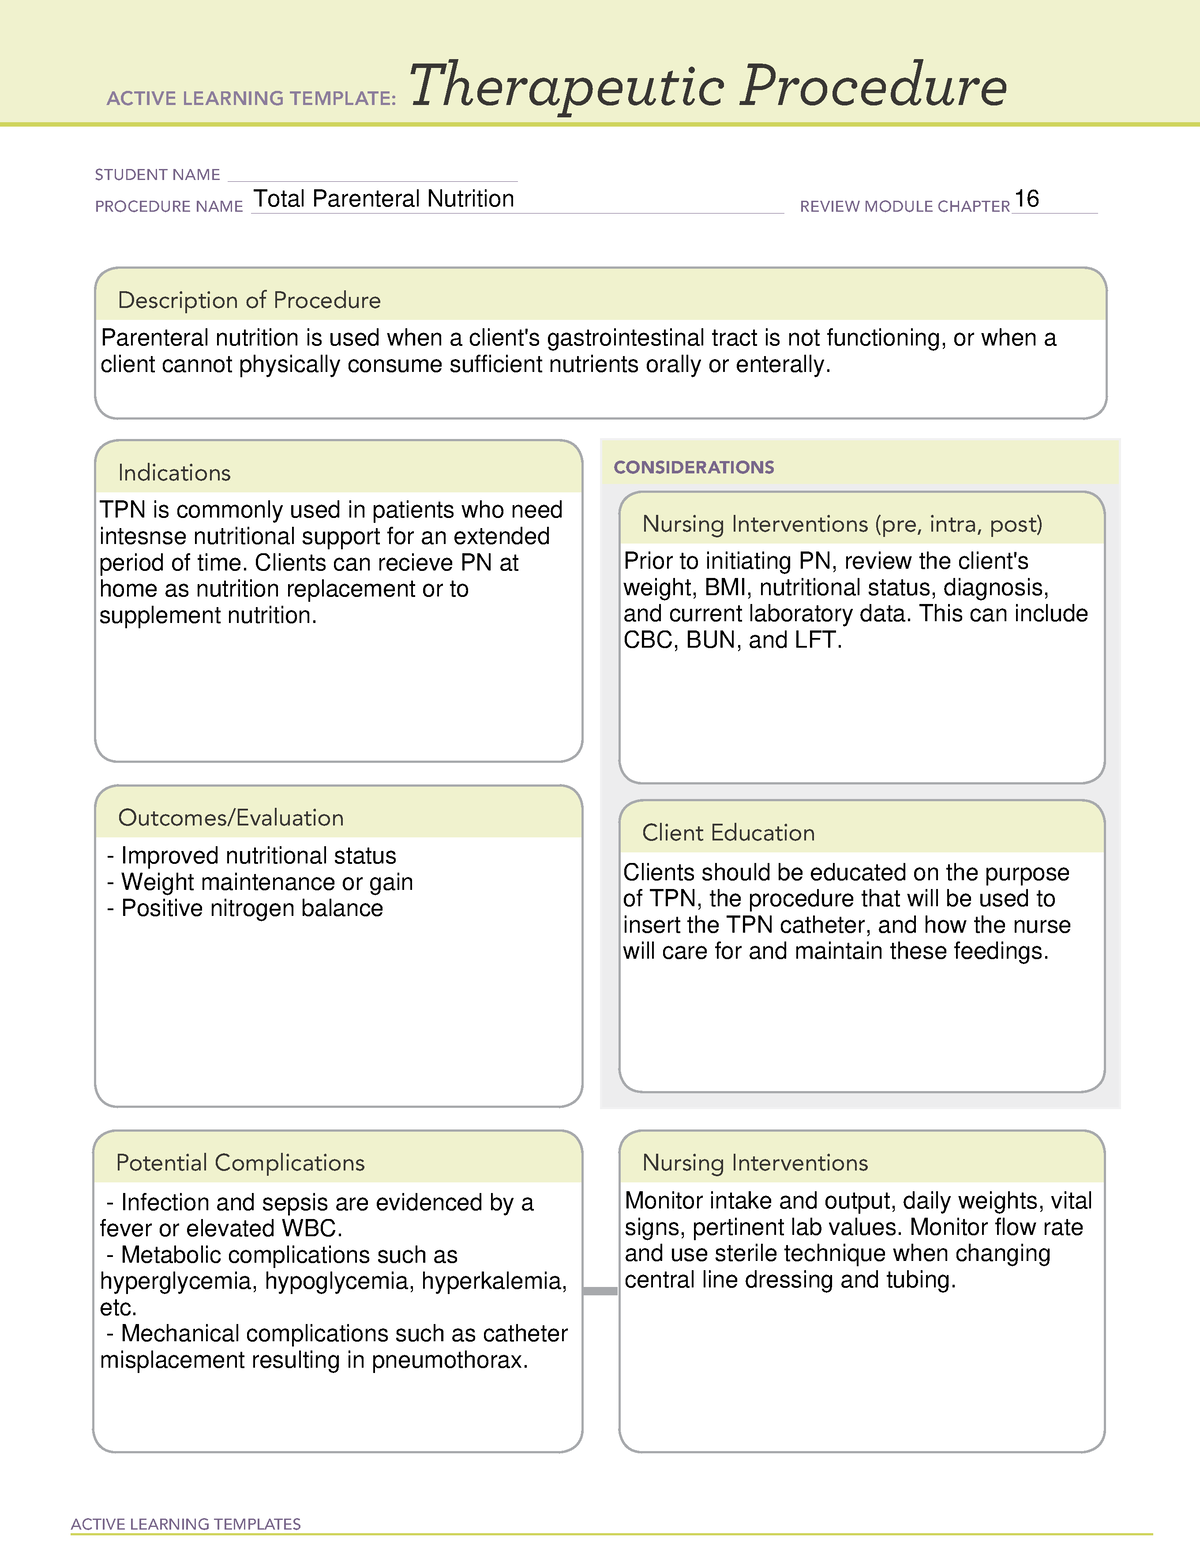 total-parenteral-nutrition-active-learning-templates-therapeutic